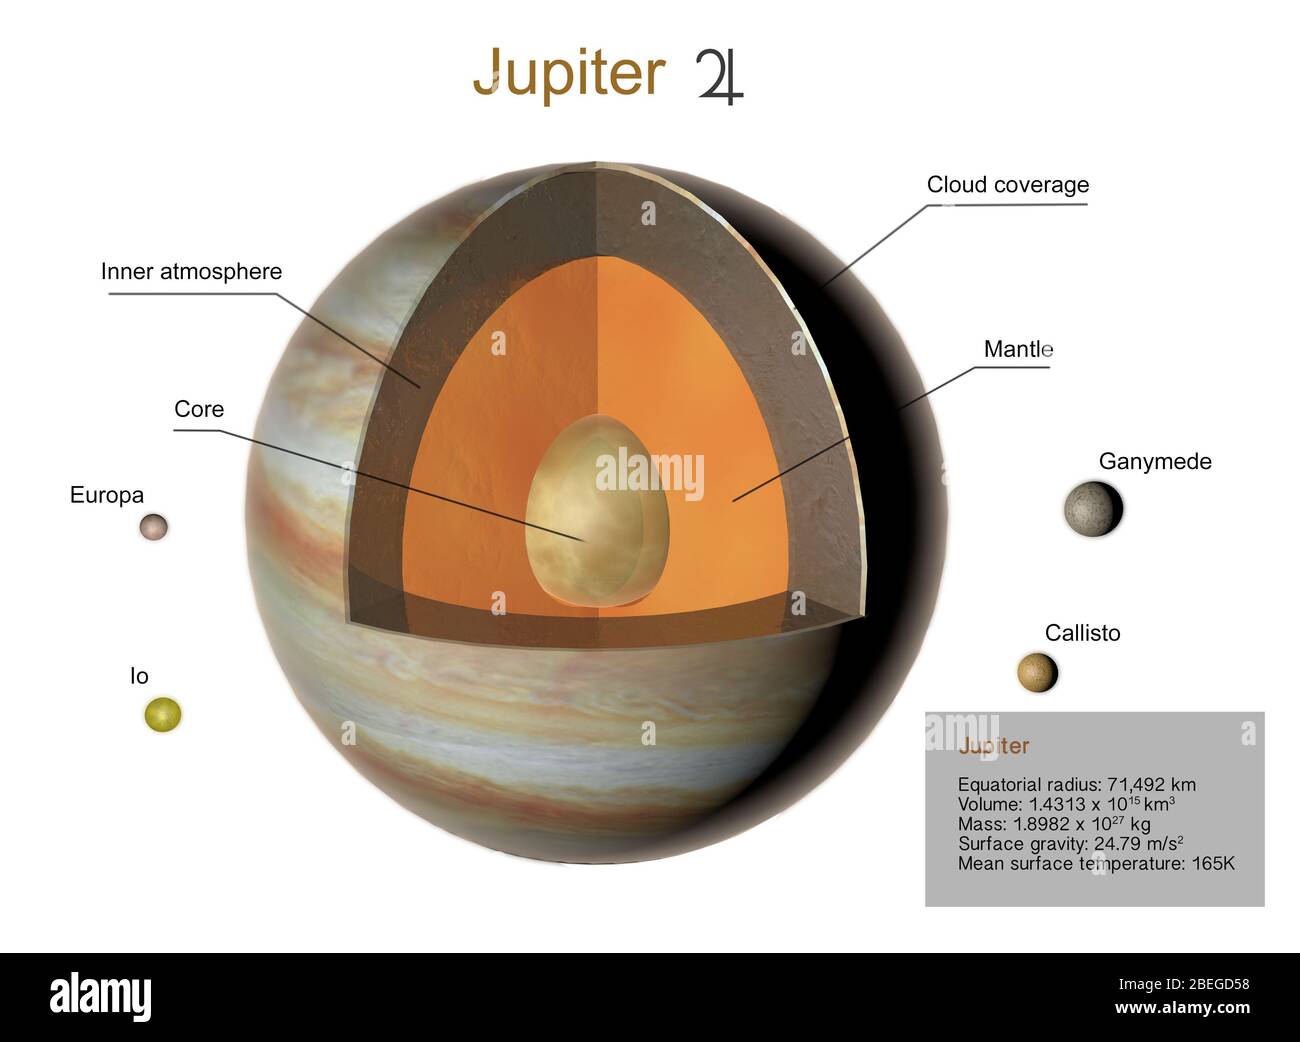 Illustration of the planet Jupiter, with a cutaway view of the gas giant's interior. Also shown are the Galilean moons of Jupiter: Io, Europa, Ganymede, and Callisto. Stock Photo